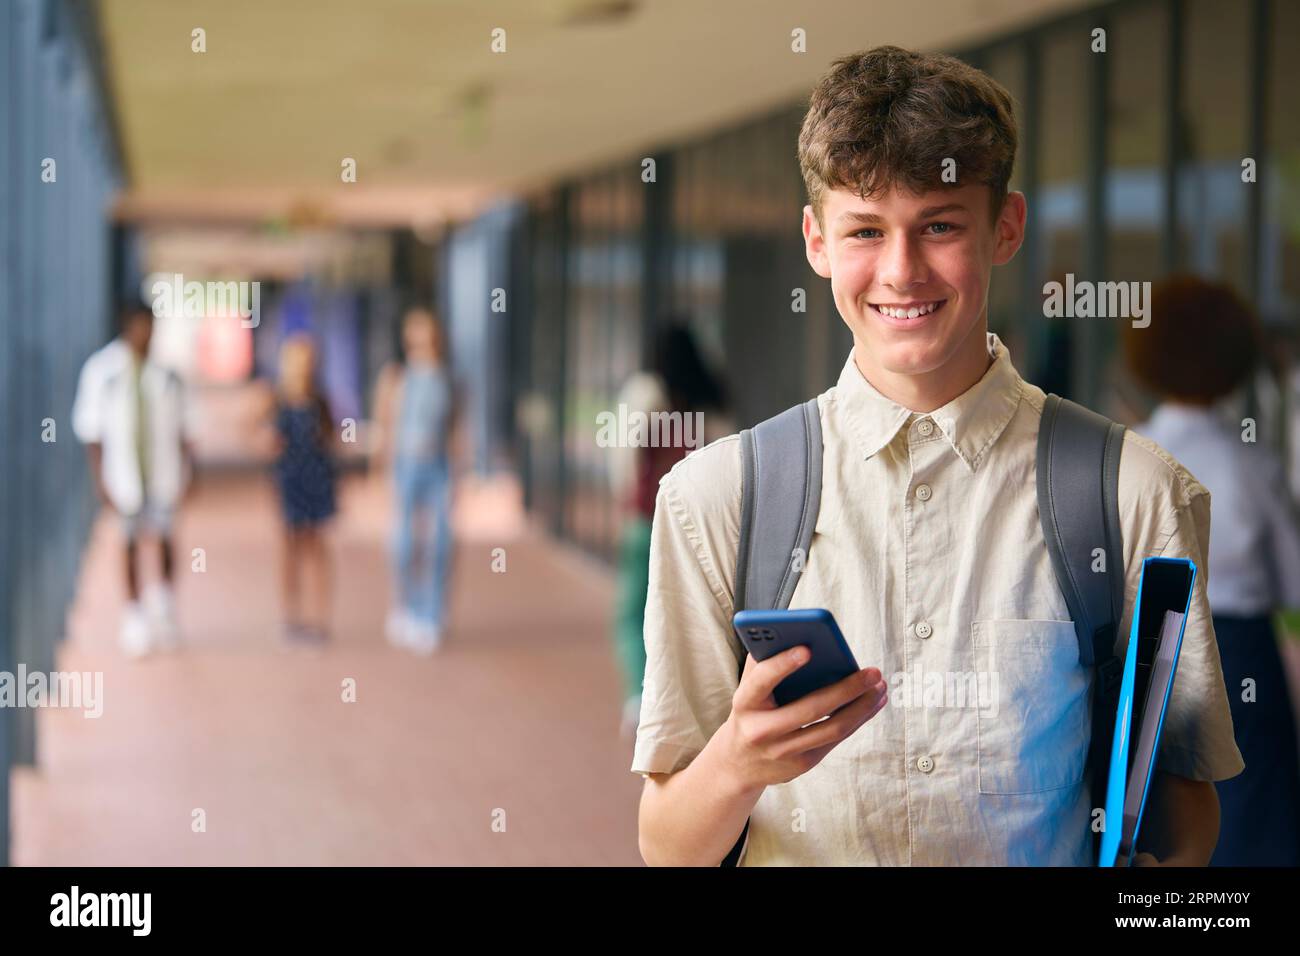 Portrait Of Male Secondary Or High School Student Outdoors At School With Mobile Phone Stock Photo